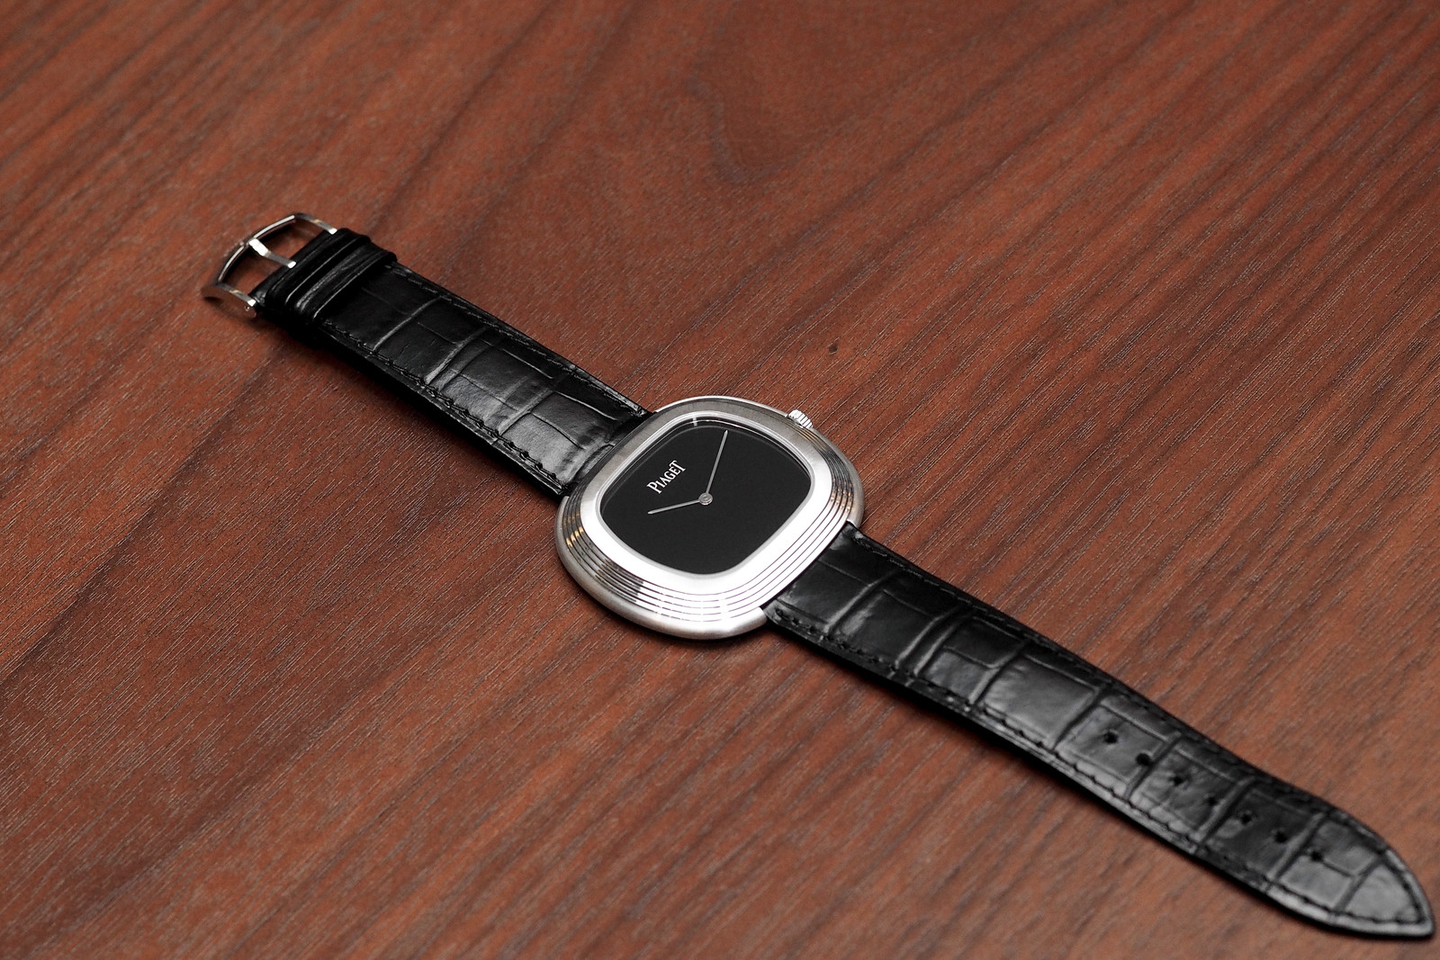 Hands-On with Piaget Vintage Inspired Black Tie